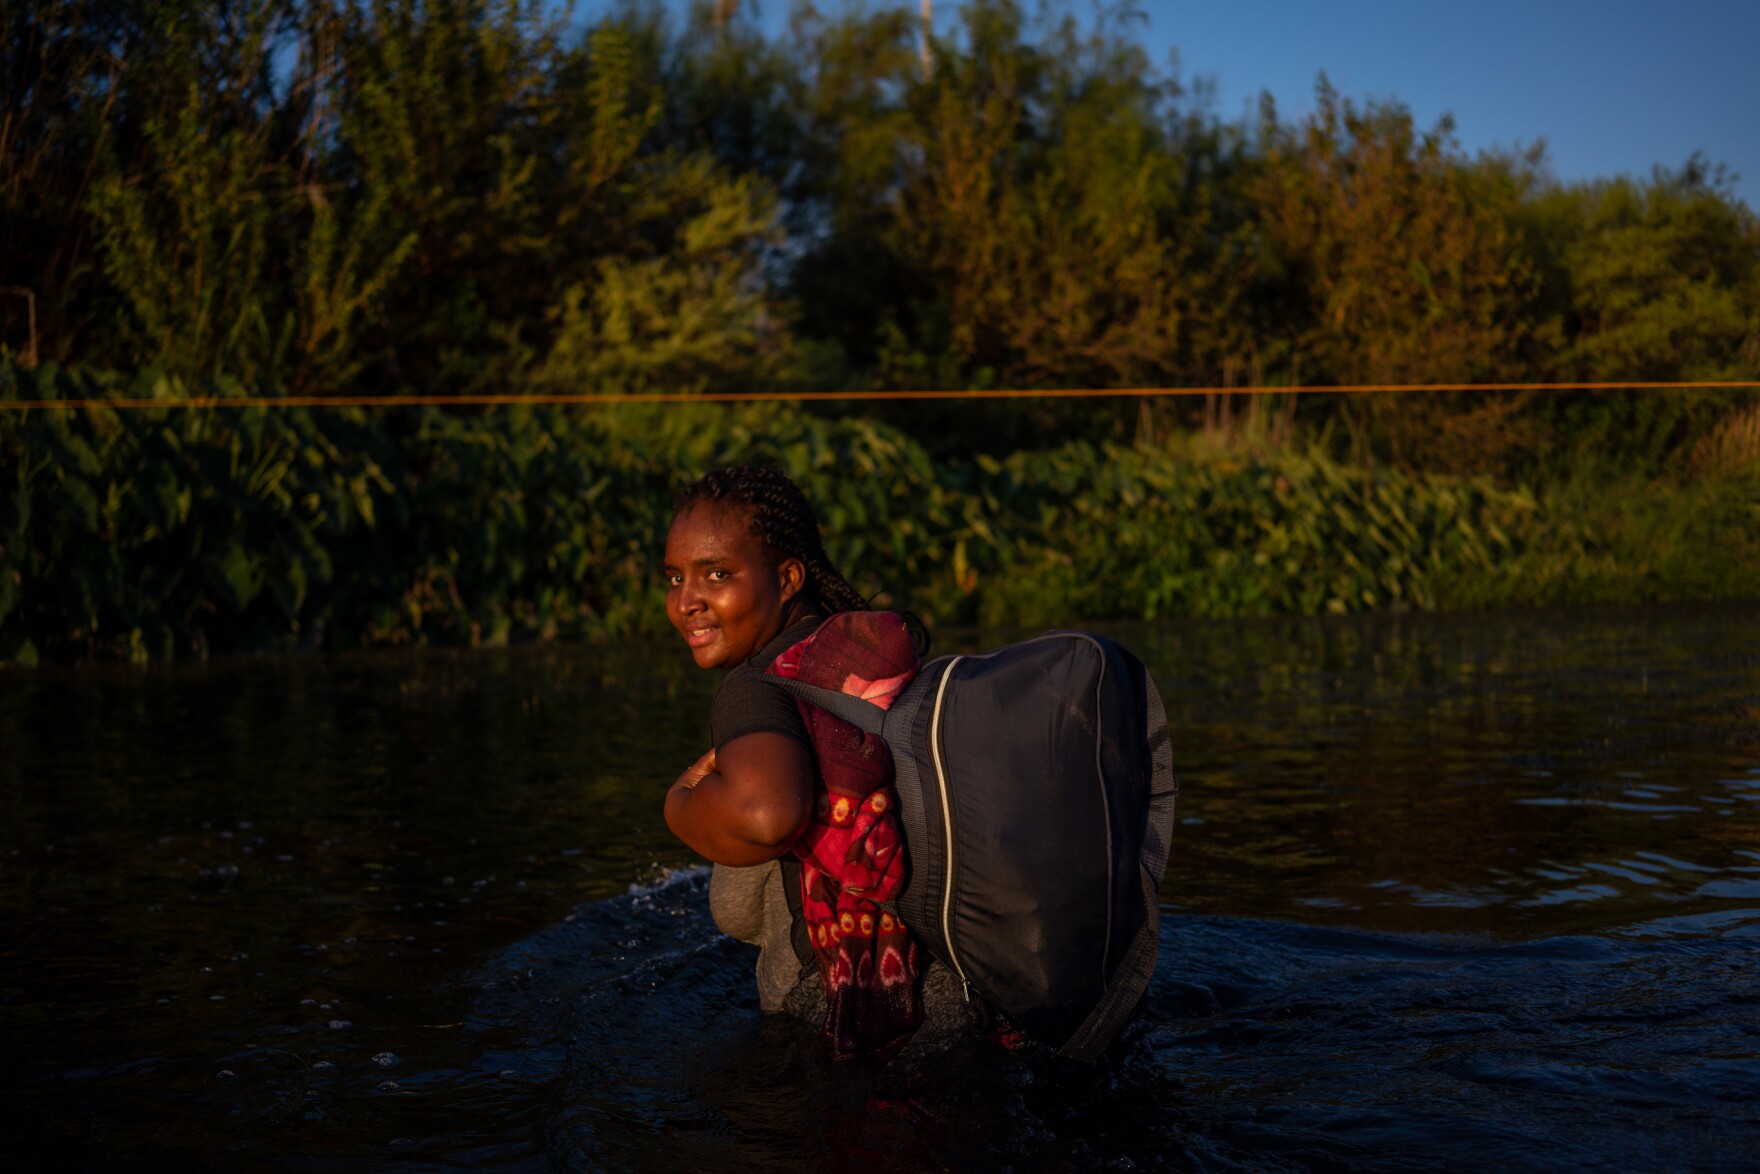 Dachka, 24, crosses the Rio Grande after leaving the camp under the Del Rio International Bridge on Sept. 20, 2021. She said she feared being deported back to Haiti.